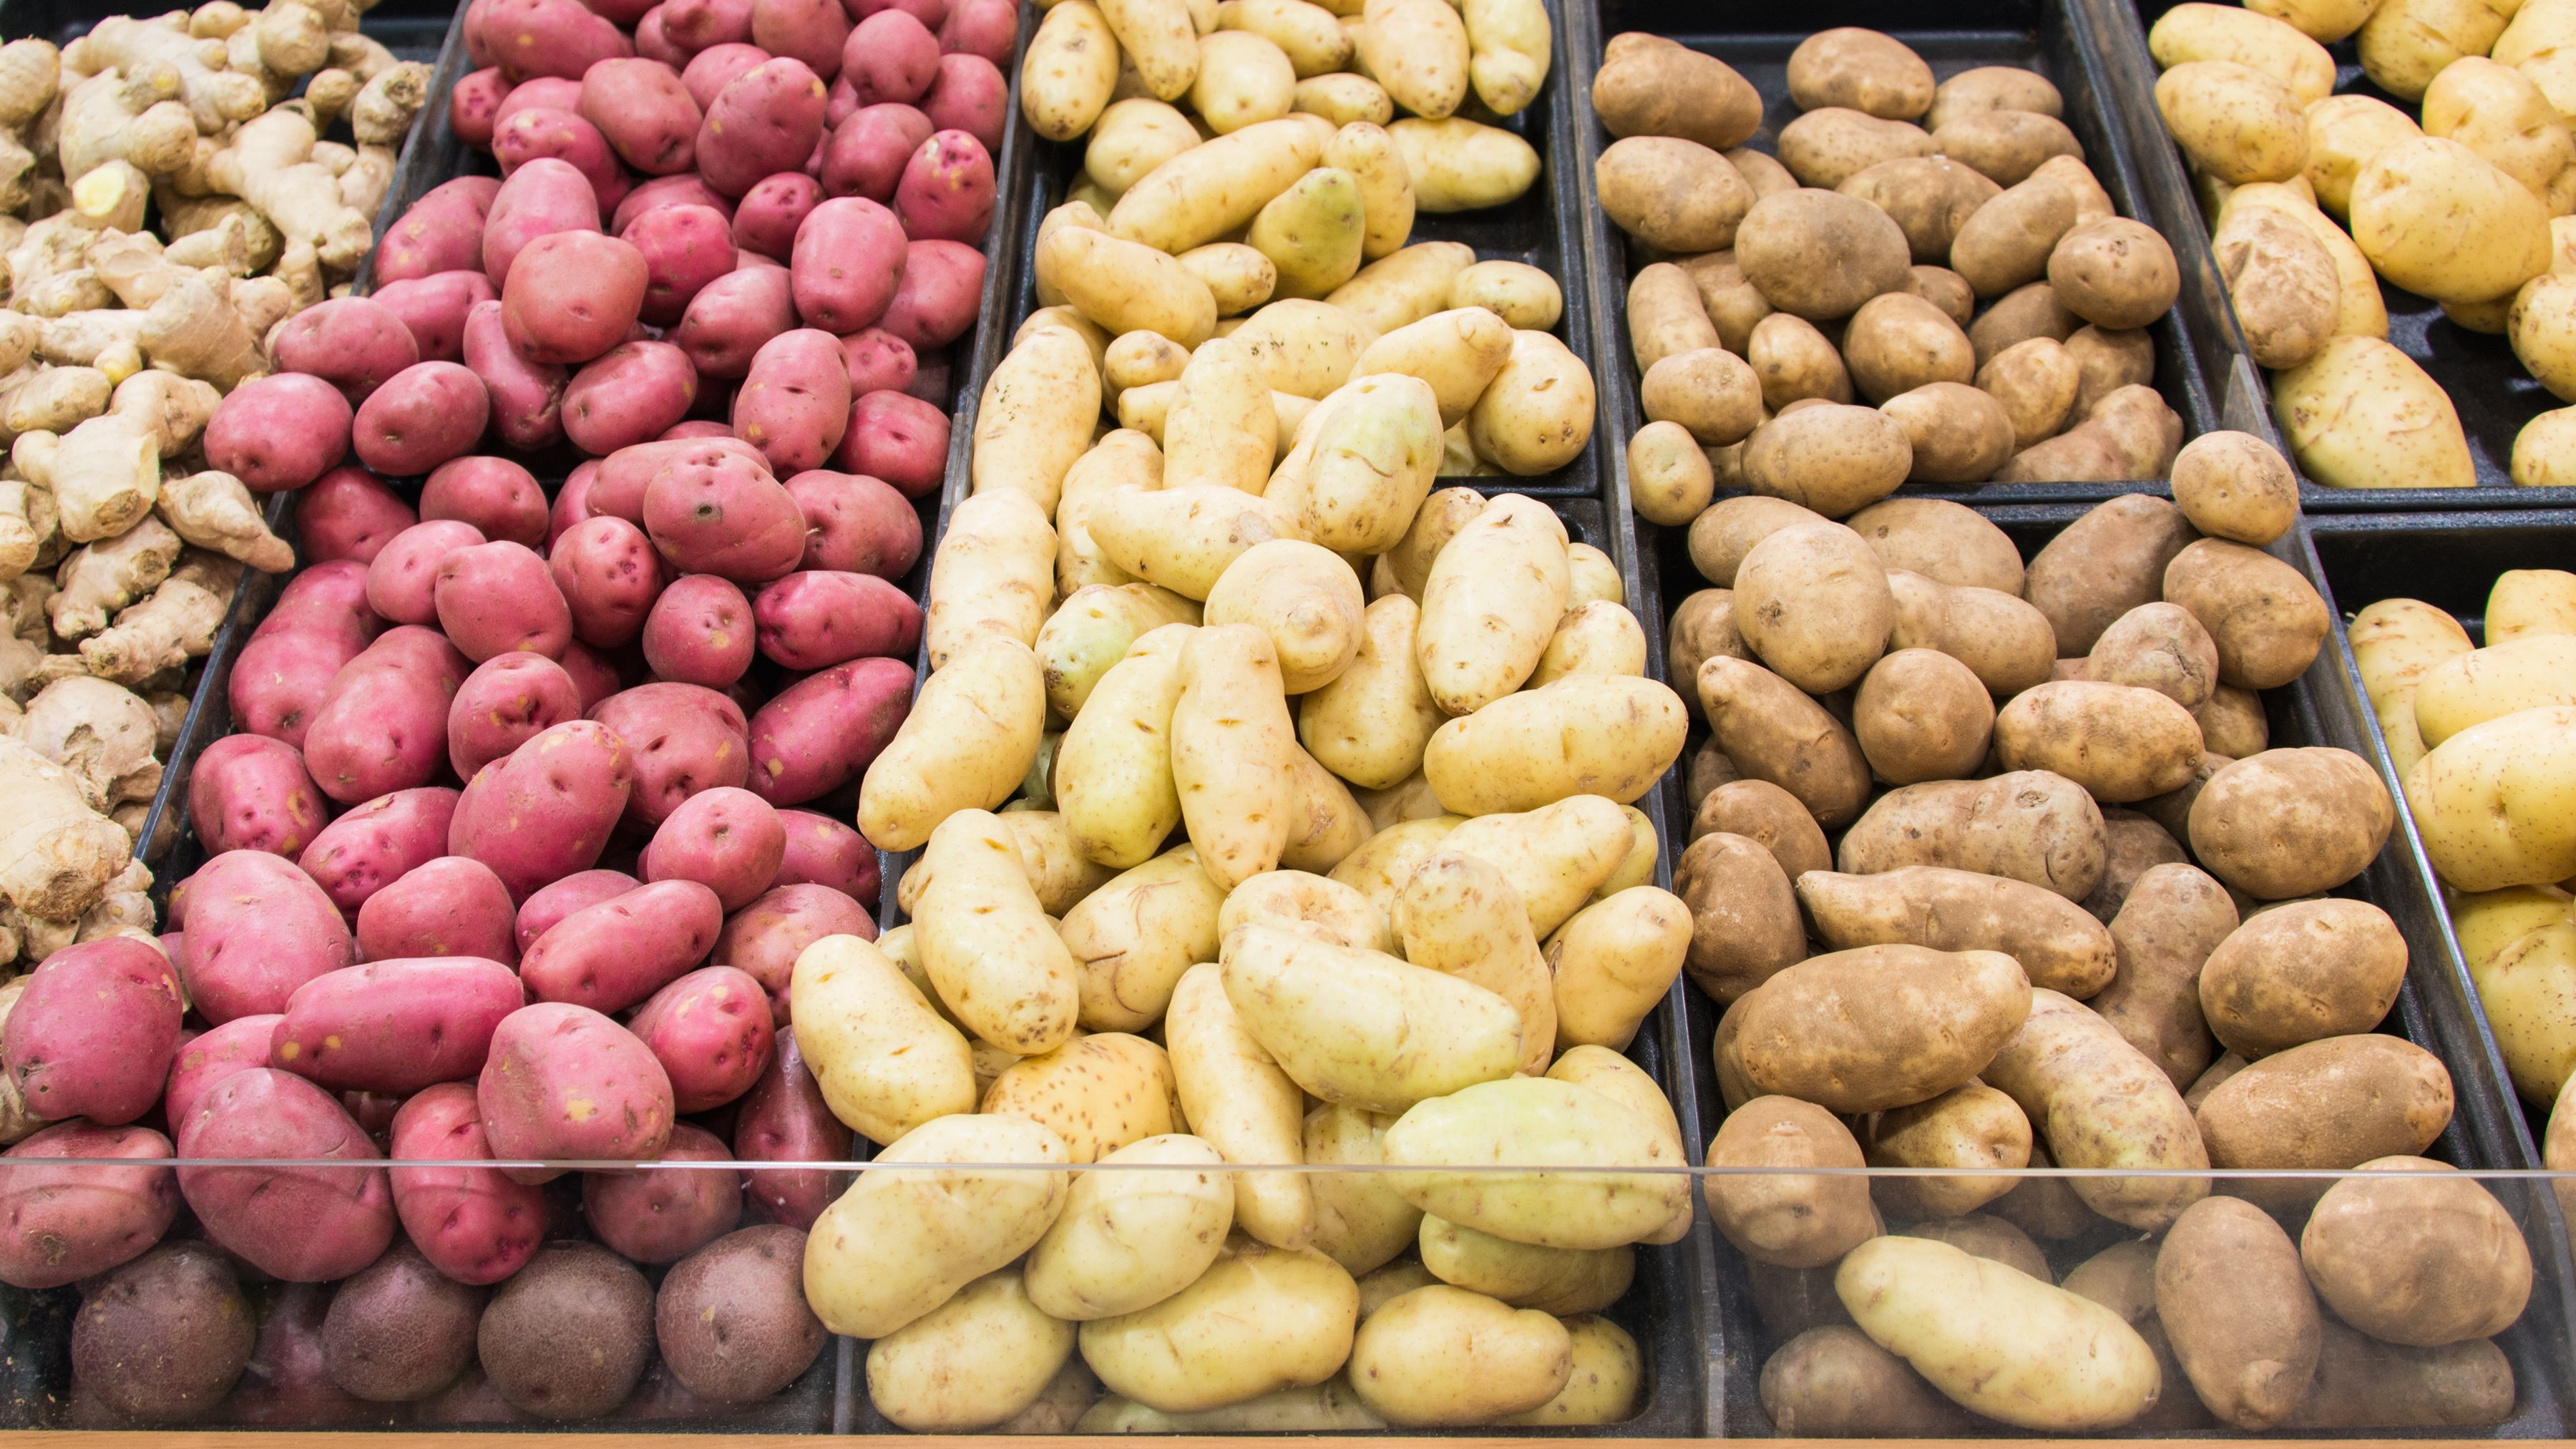 https://hips.hearstapps.com/hmg-prod/images/types-of-potatoes-different-kinds-of-potatoes-1624896435.jpg?crop=1xw:0.8773830155979203xh;center,top